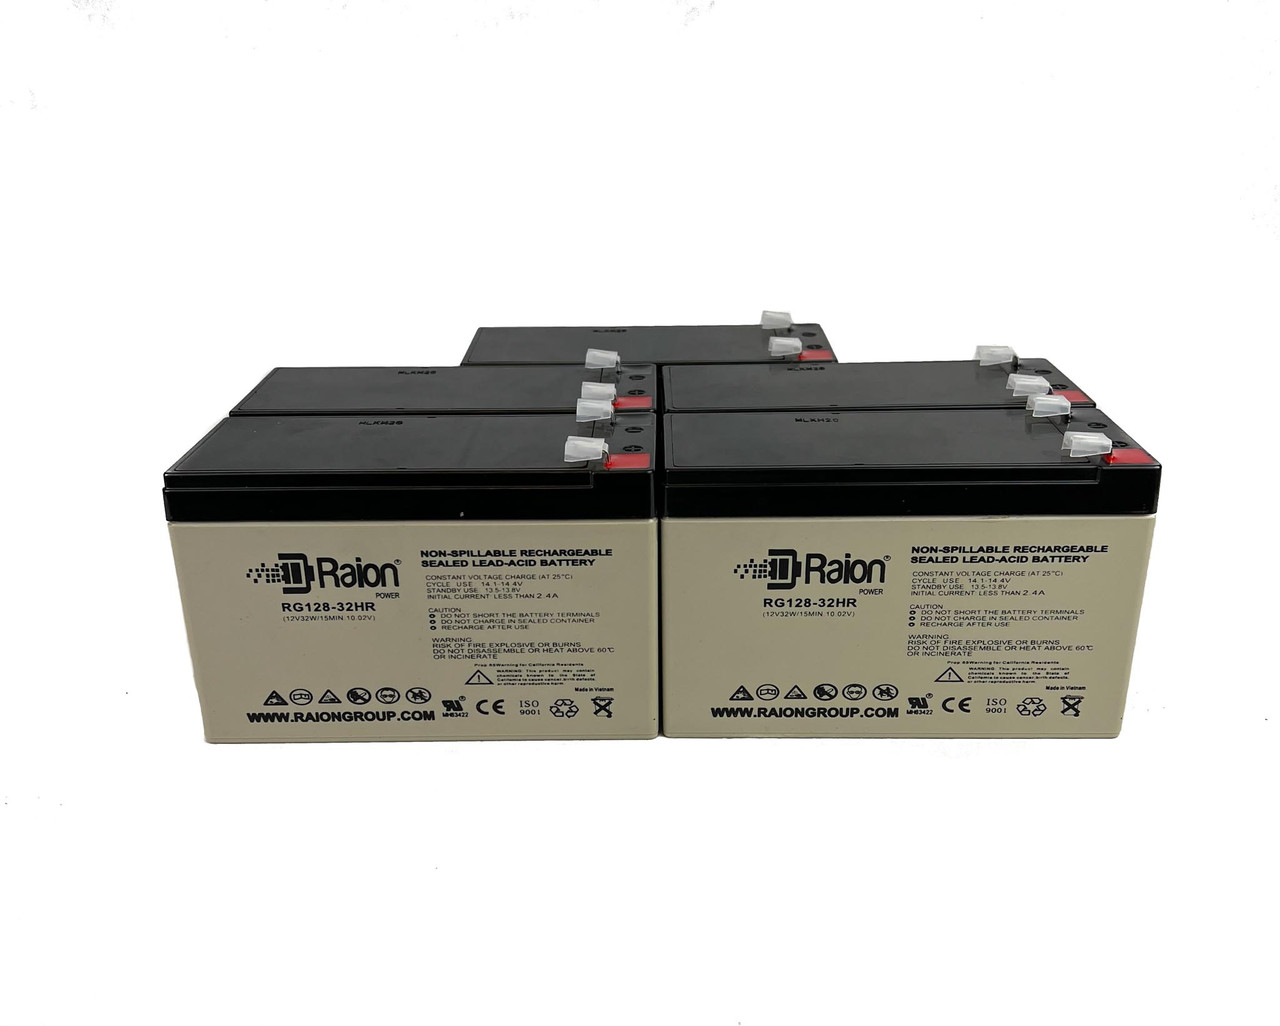 Raion Power 12V 7.5Ah High Rate Discharge UPS Batteries for IntelliPower 2000VA 1400W FA00041 - 5 Pack